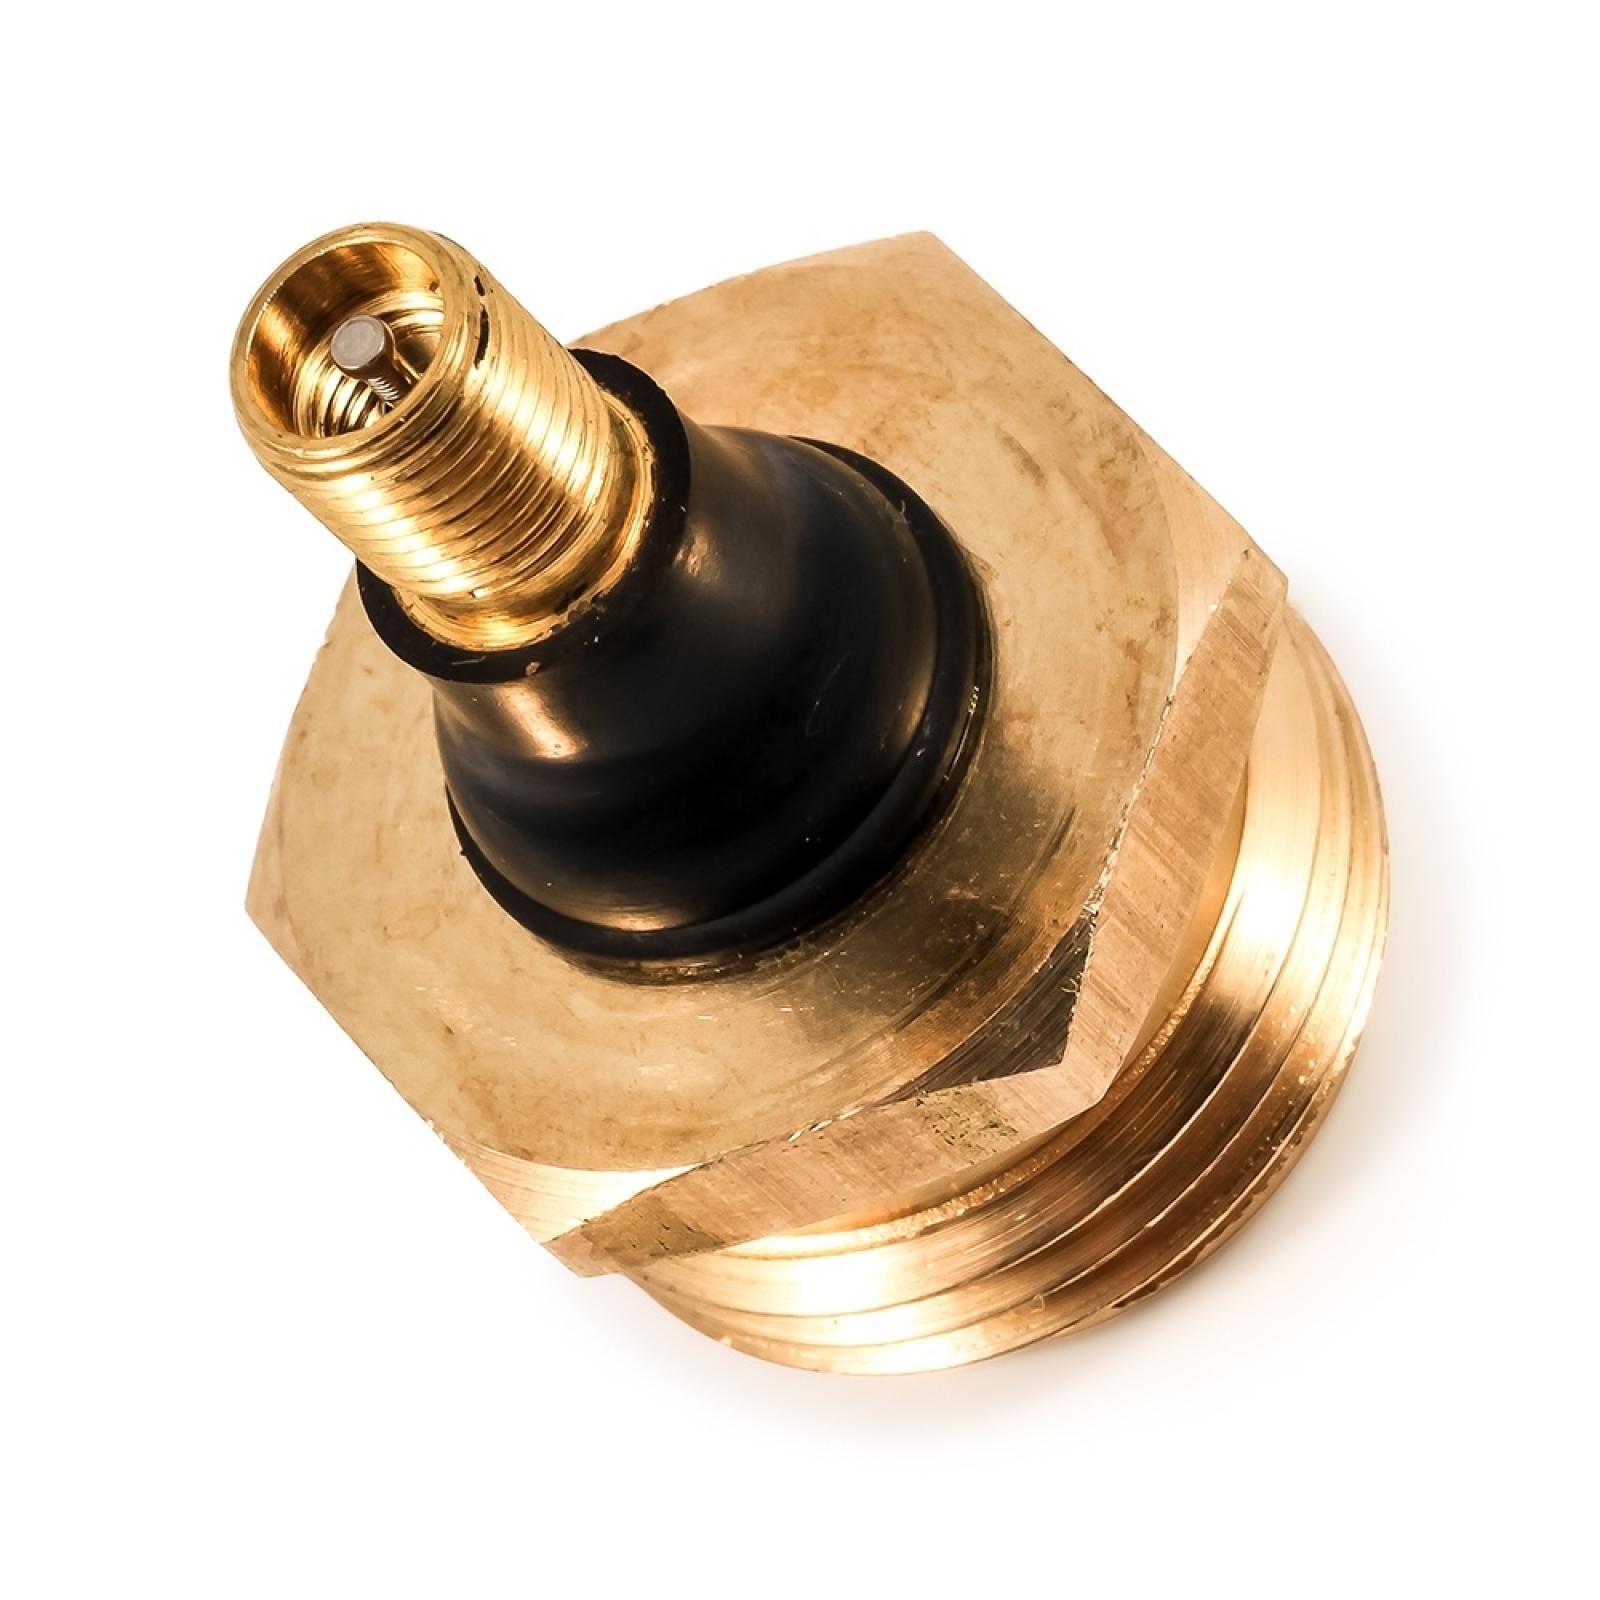 Camco Brass Blow Out Plug